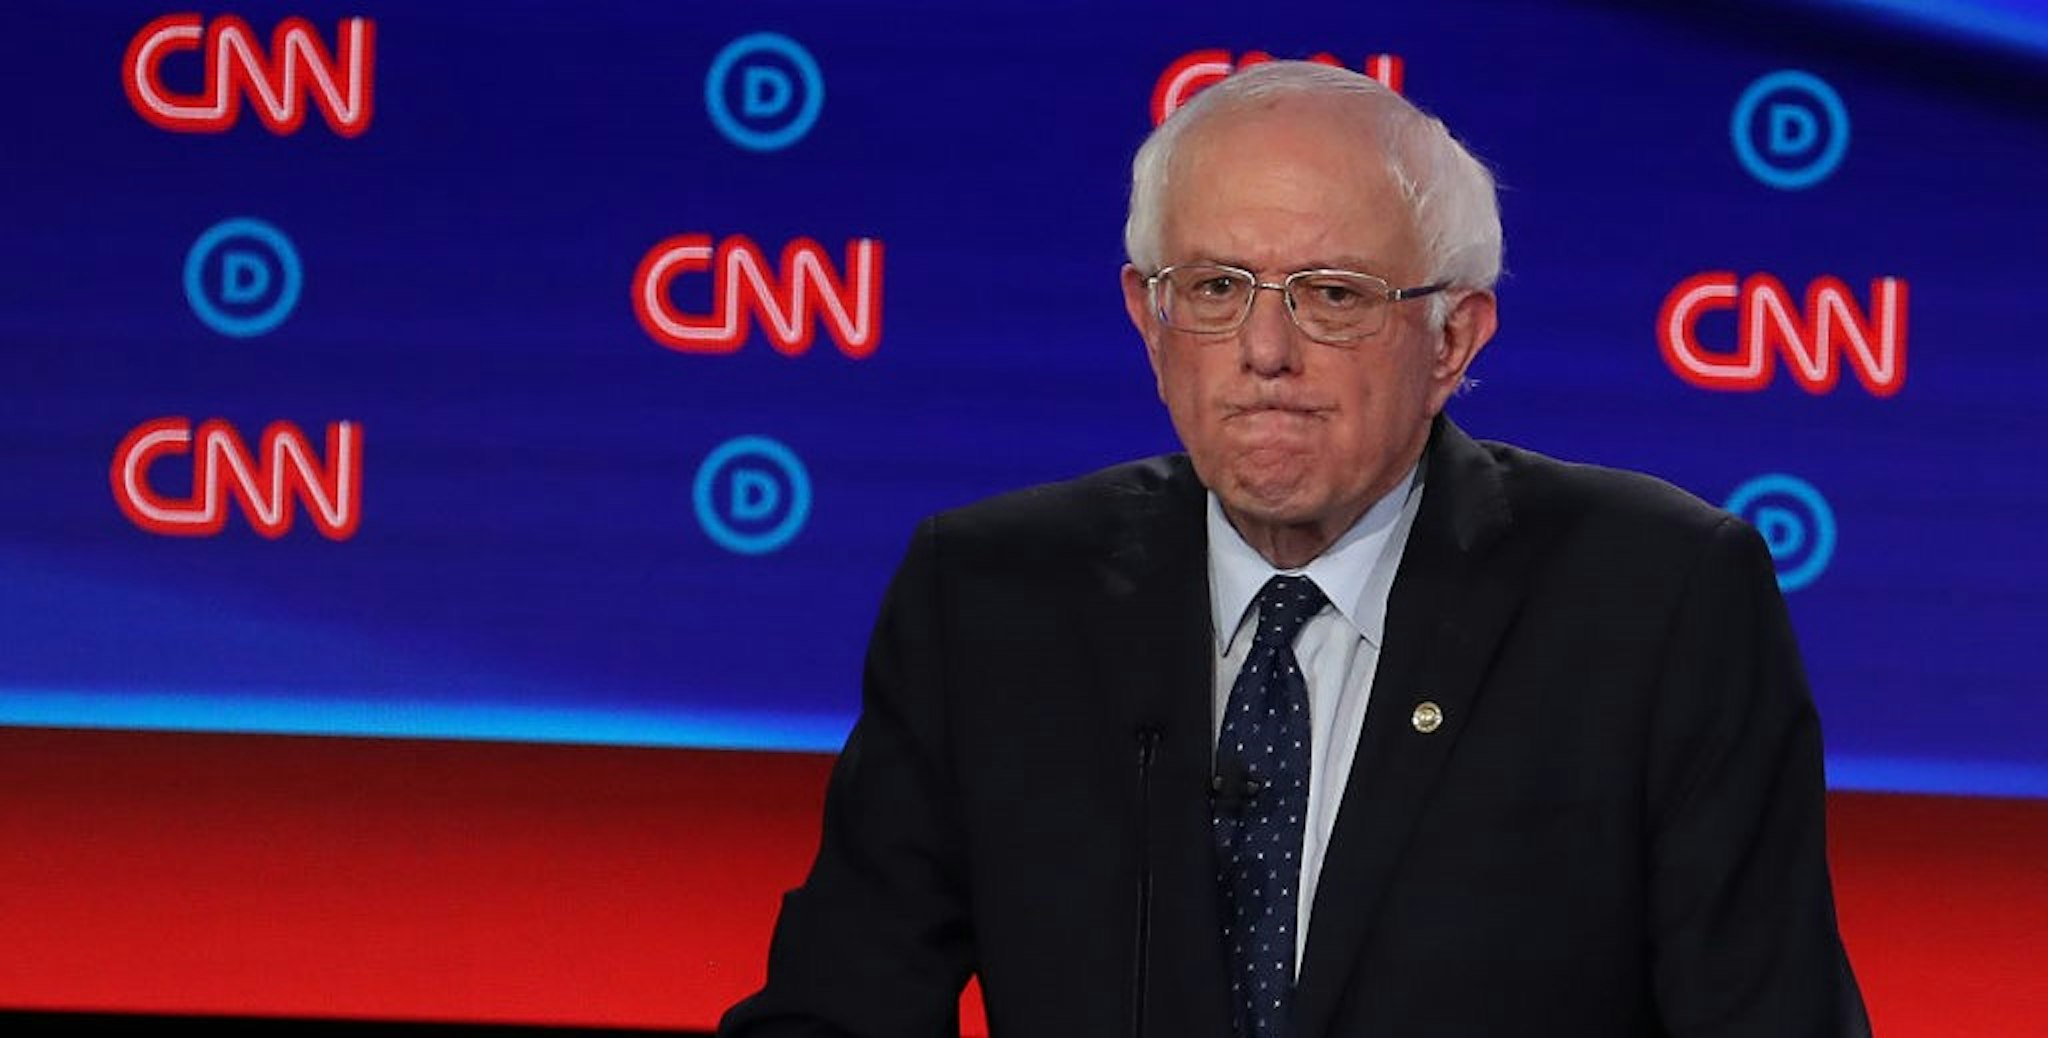 DETROIT, MICHIGAN - JULY 30: Democratic presidential candidate Sen. Bernie Sanders (I-VT) gestures during the Democratic Presidential Debate at the Fox Theatre July 30, 2019 in Detroit, Michigan. 20 Democratic presidential candidates were split into two groups of 10 to take part in the debate sponsored by CNN held over two nights at Detroit’s Fox Theatre. (Photo by